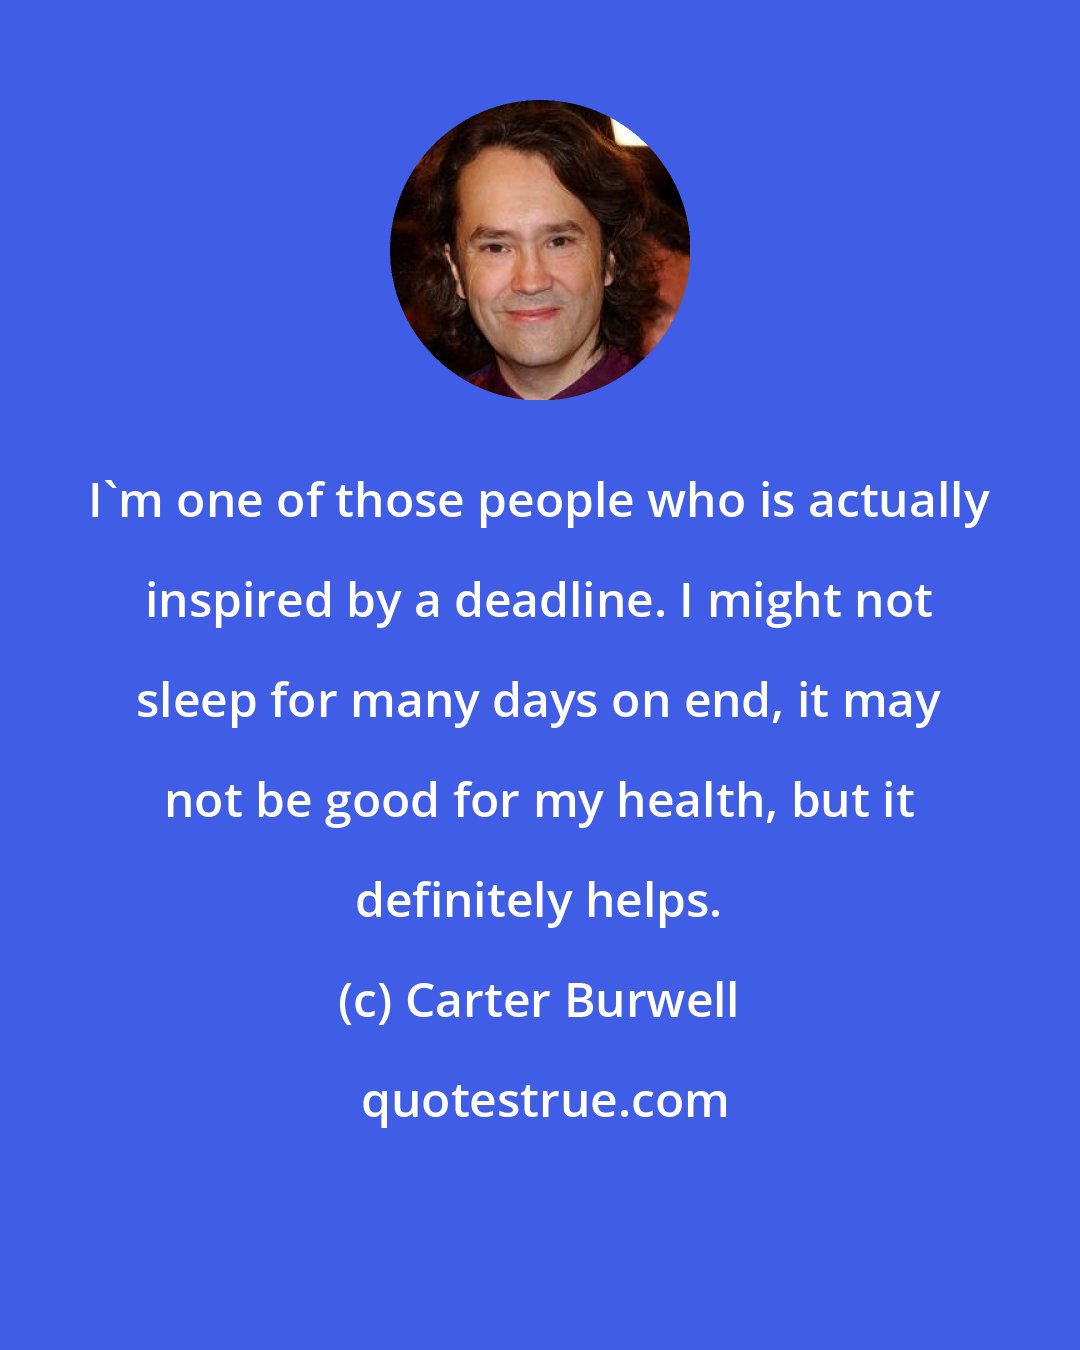 Carter Burwell: I'm one of those people who is actually inspired by a deadline. I might not sleep for many days on end, it may not be good for my health, but it definitely helps.